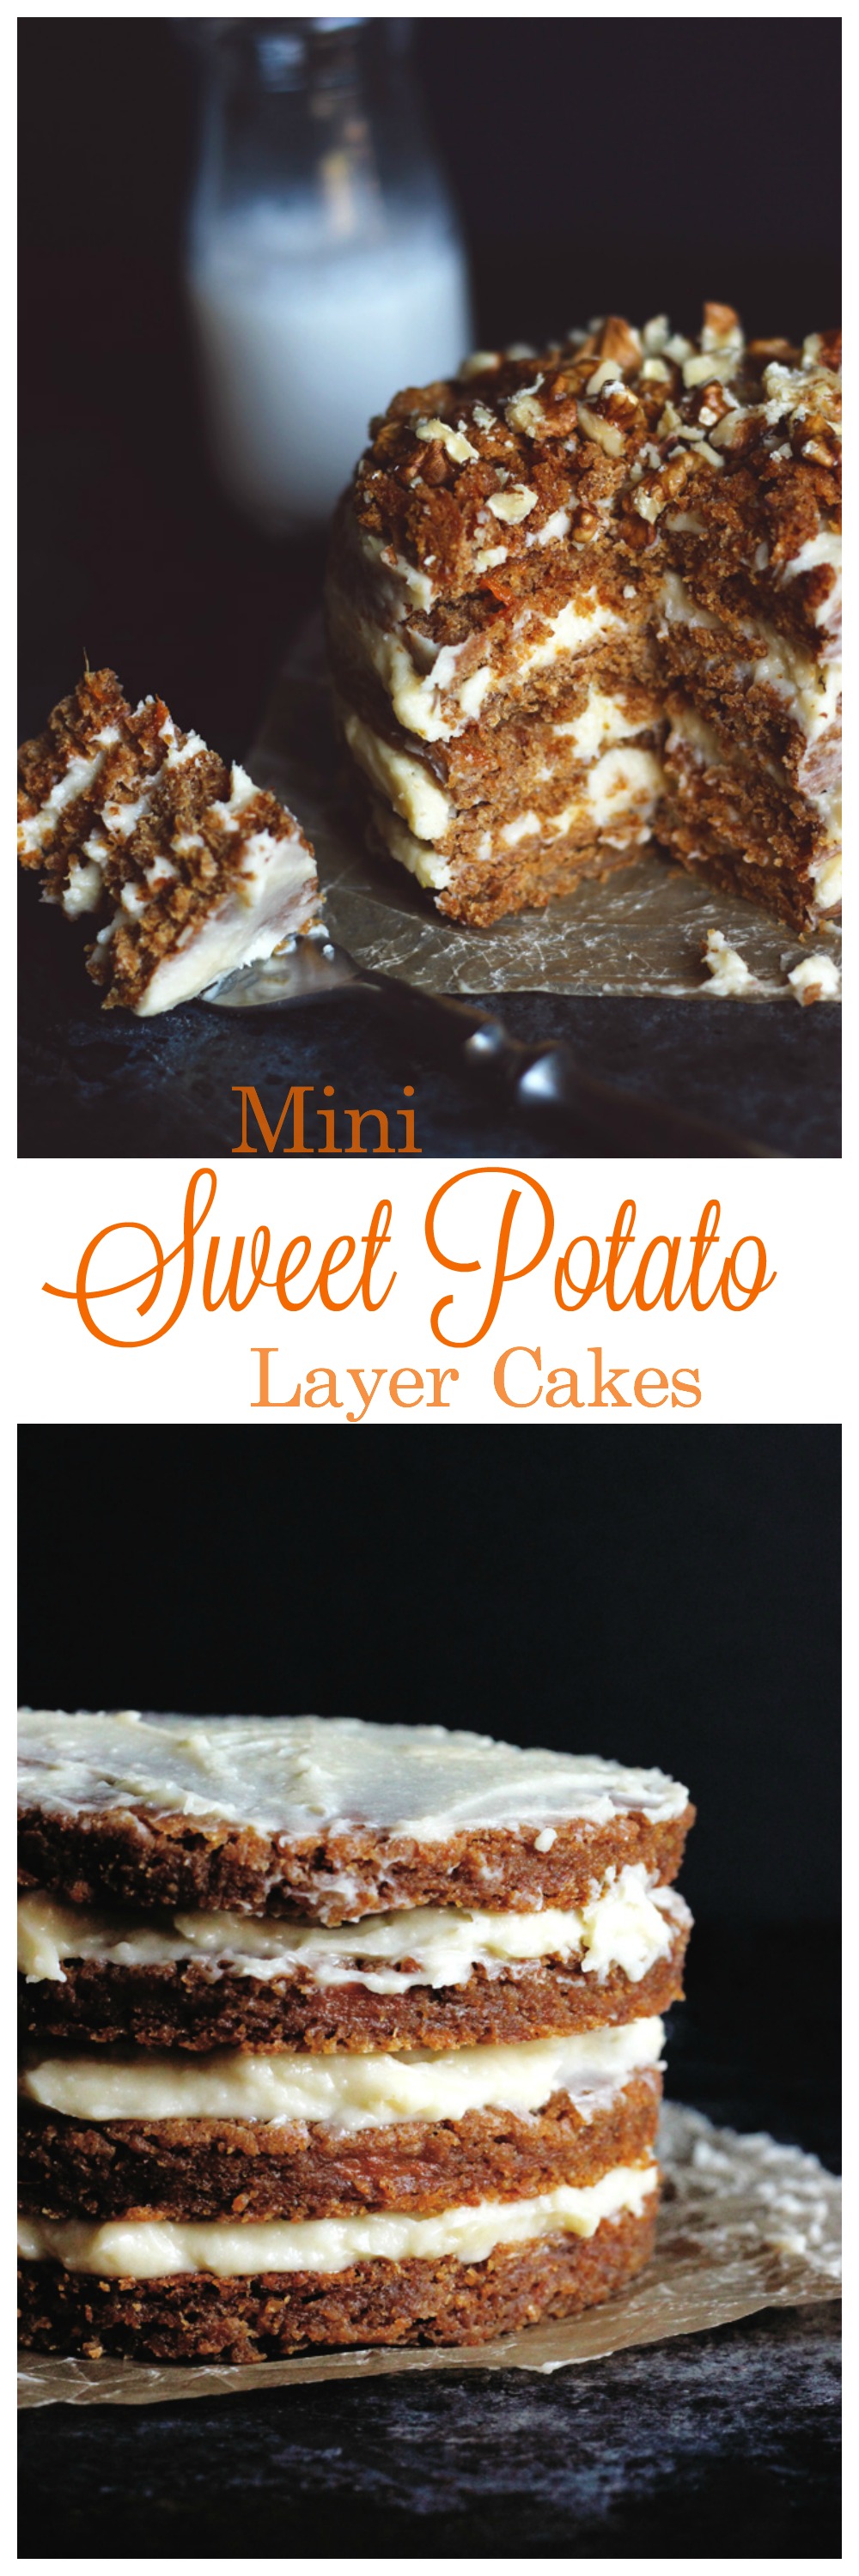 Mini Sweet Potato Layer Cakes - Moist, Sweet, Delicious and the best tasting side of healthy. NeuroticMommy.com #vegan #cakes #thanksgiving